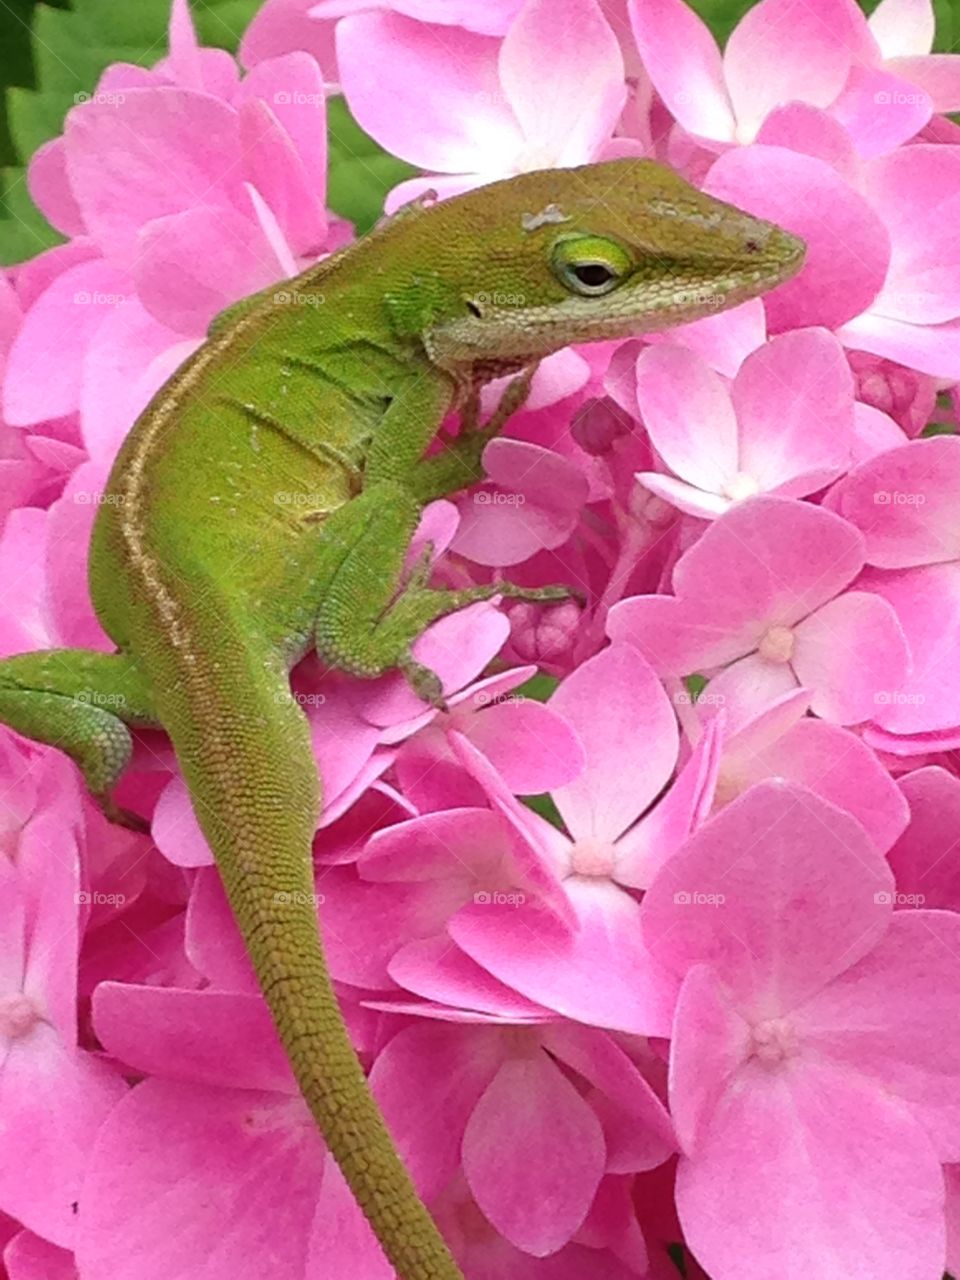 Can you see me now?. Green lizard on pink flowers